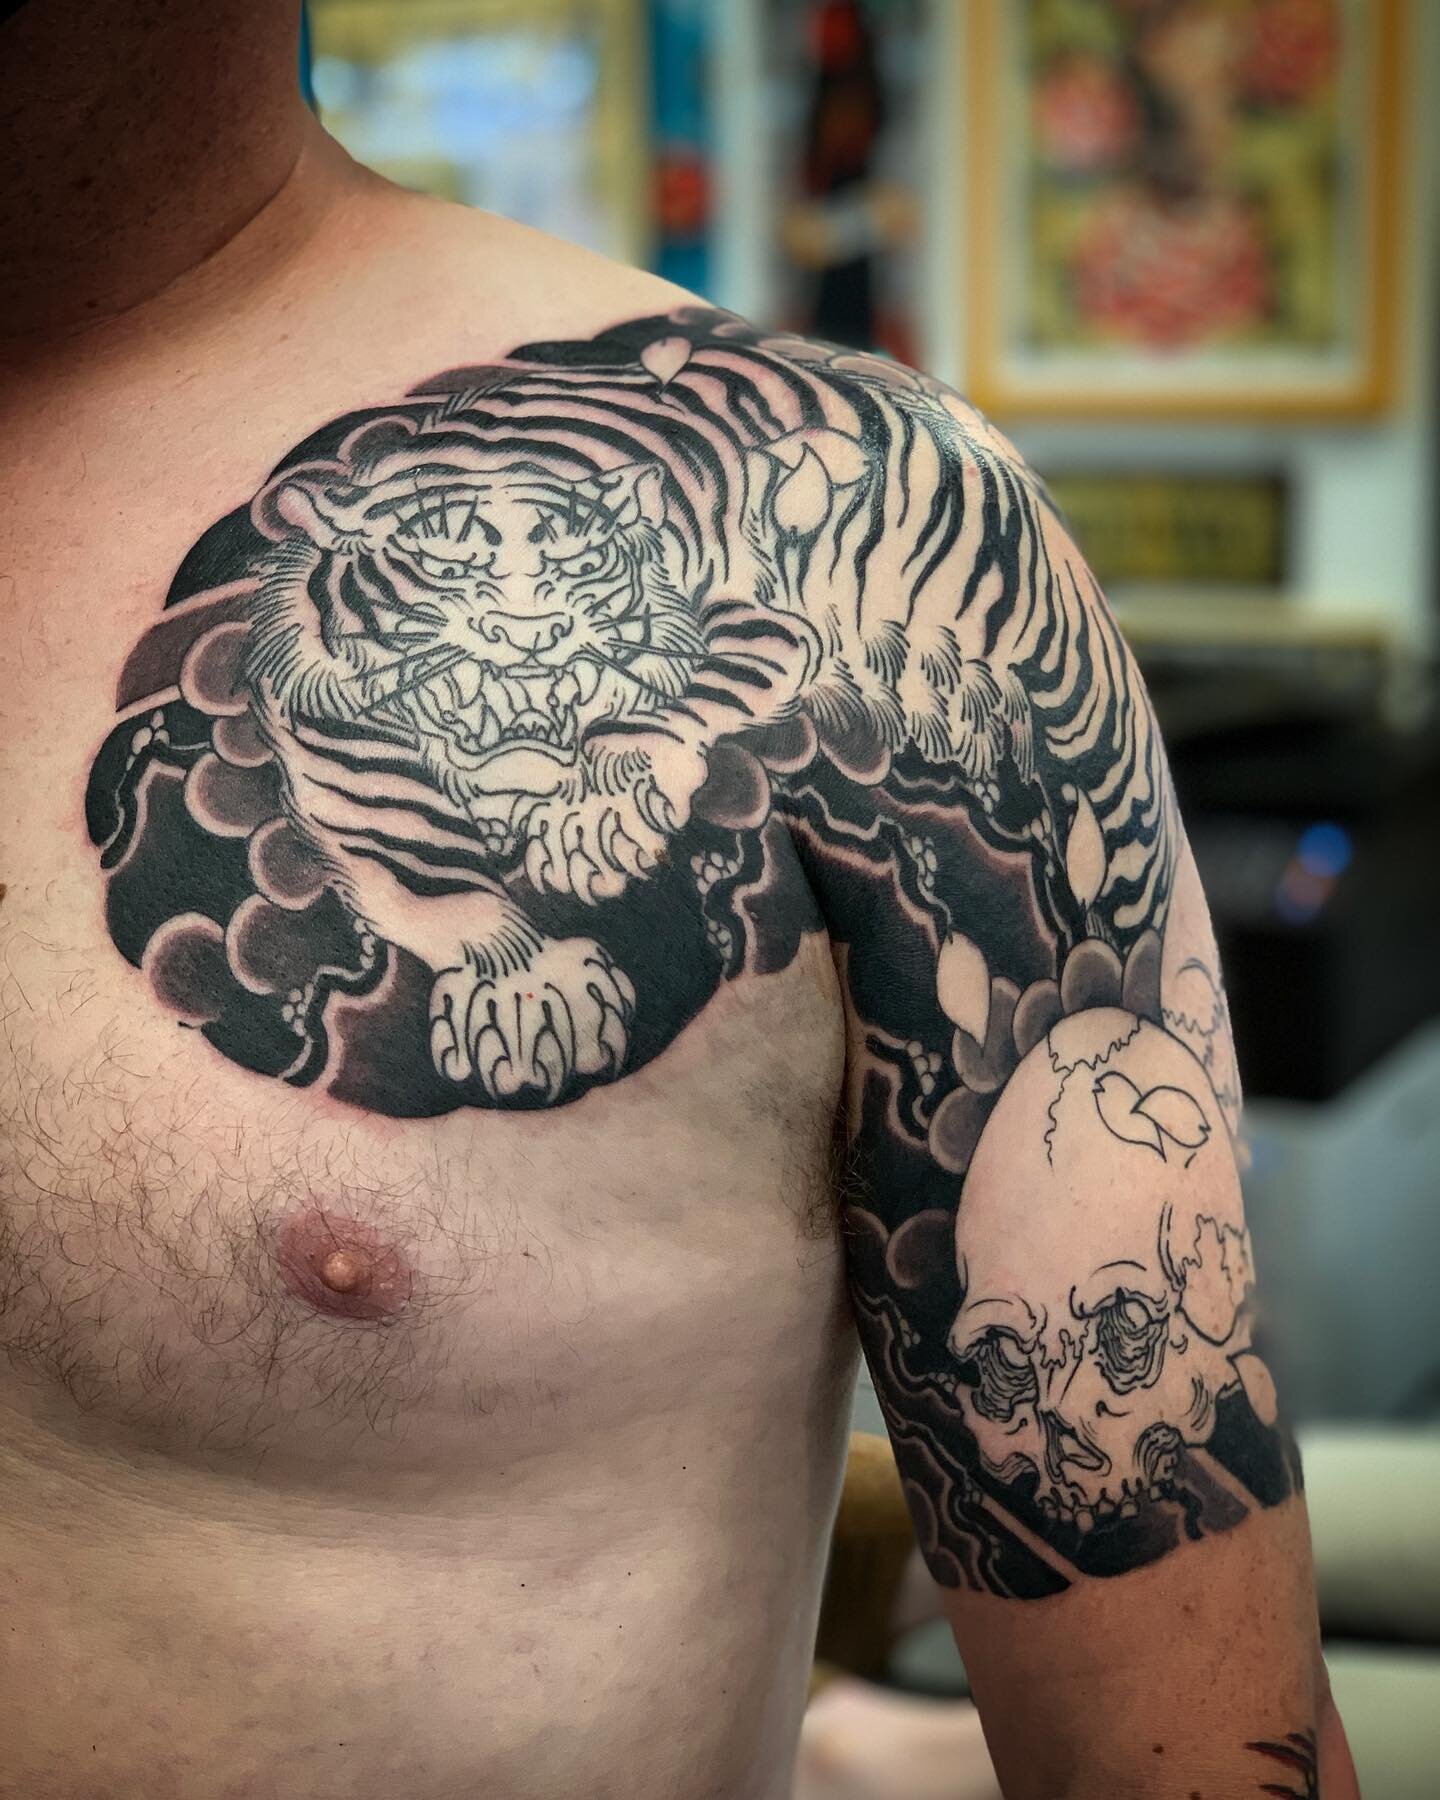 Tiger and skulls for Chris. What could go wrong? Cheers! @modernclassictattoo #modernclassictattoo #irezumi #tattoo #japanesetattoo #stewartrobson #stewartrobsontattoo #ilovetattooing #tiger #skulls